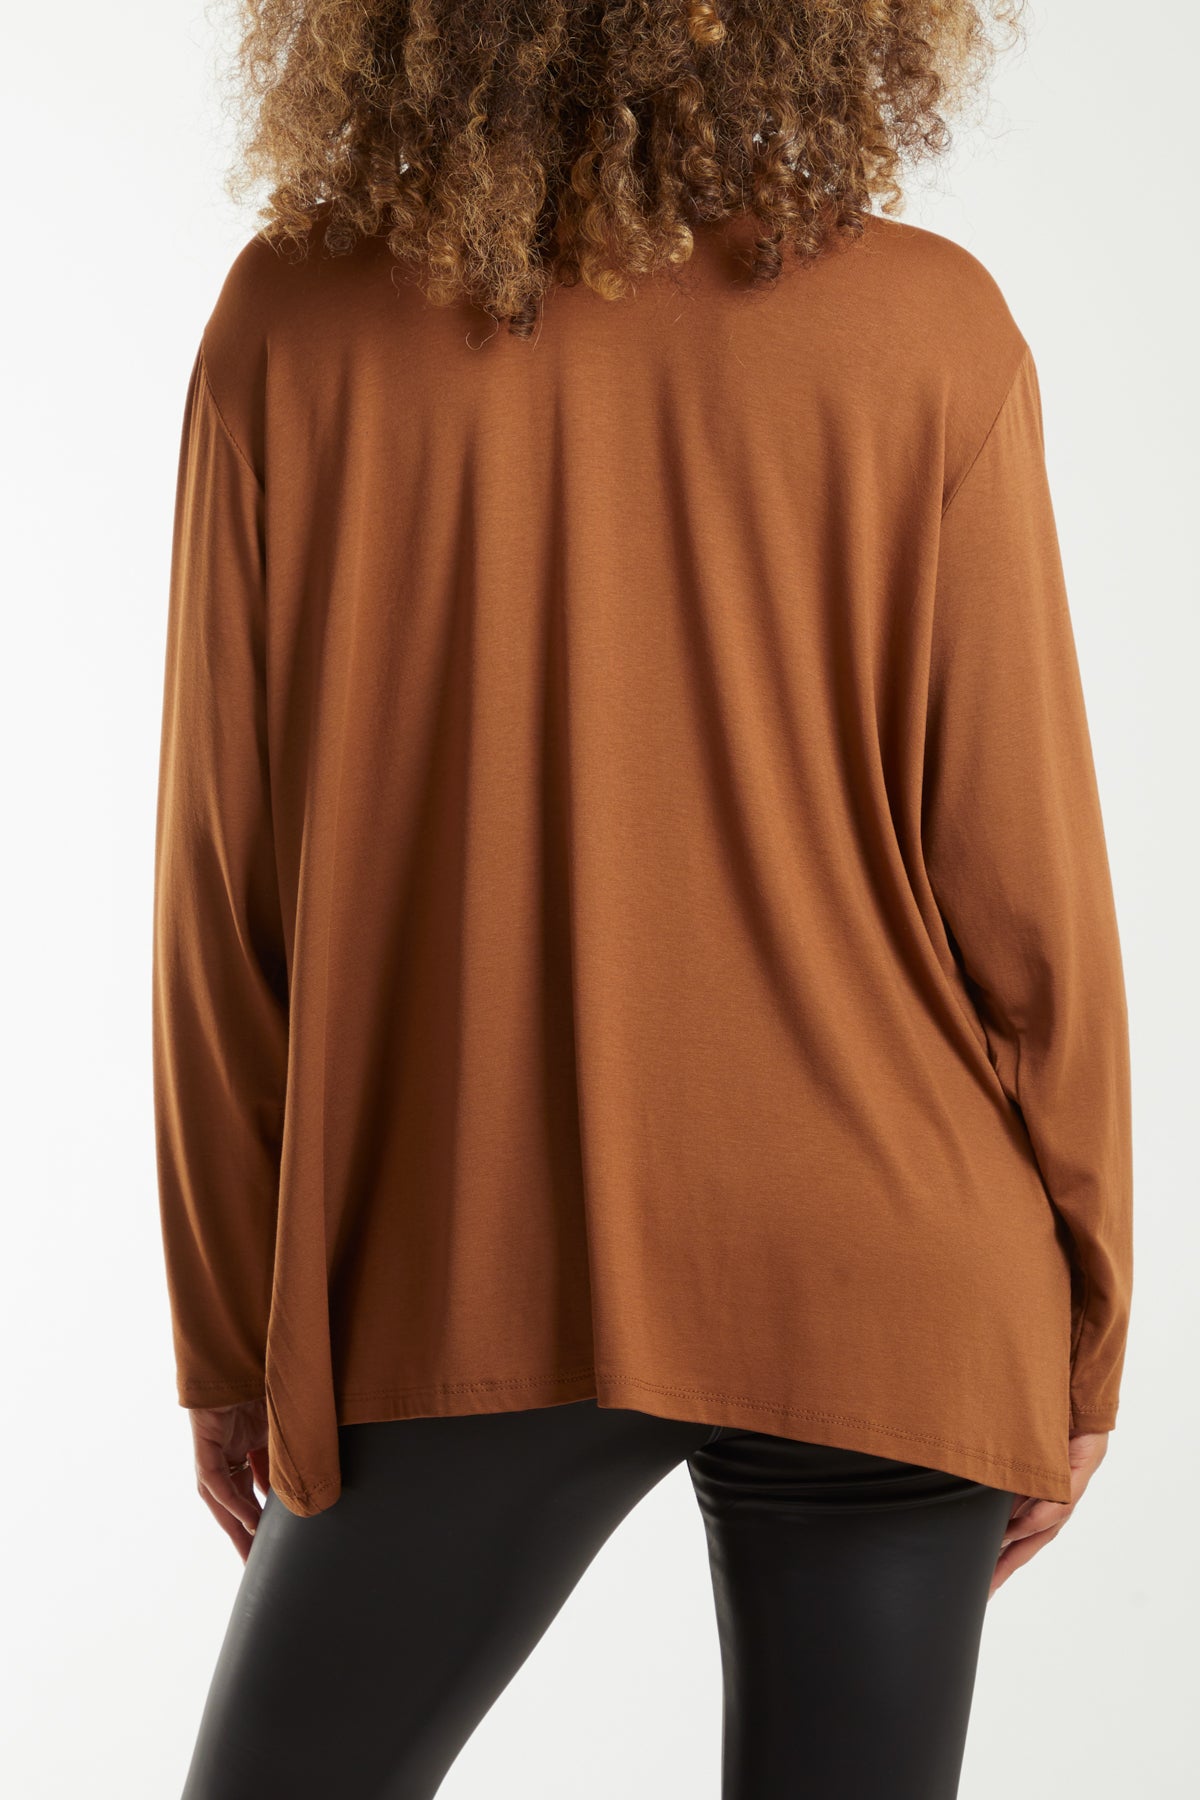 Long Sleeve Frill Turtle Neck Top